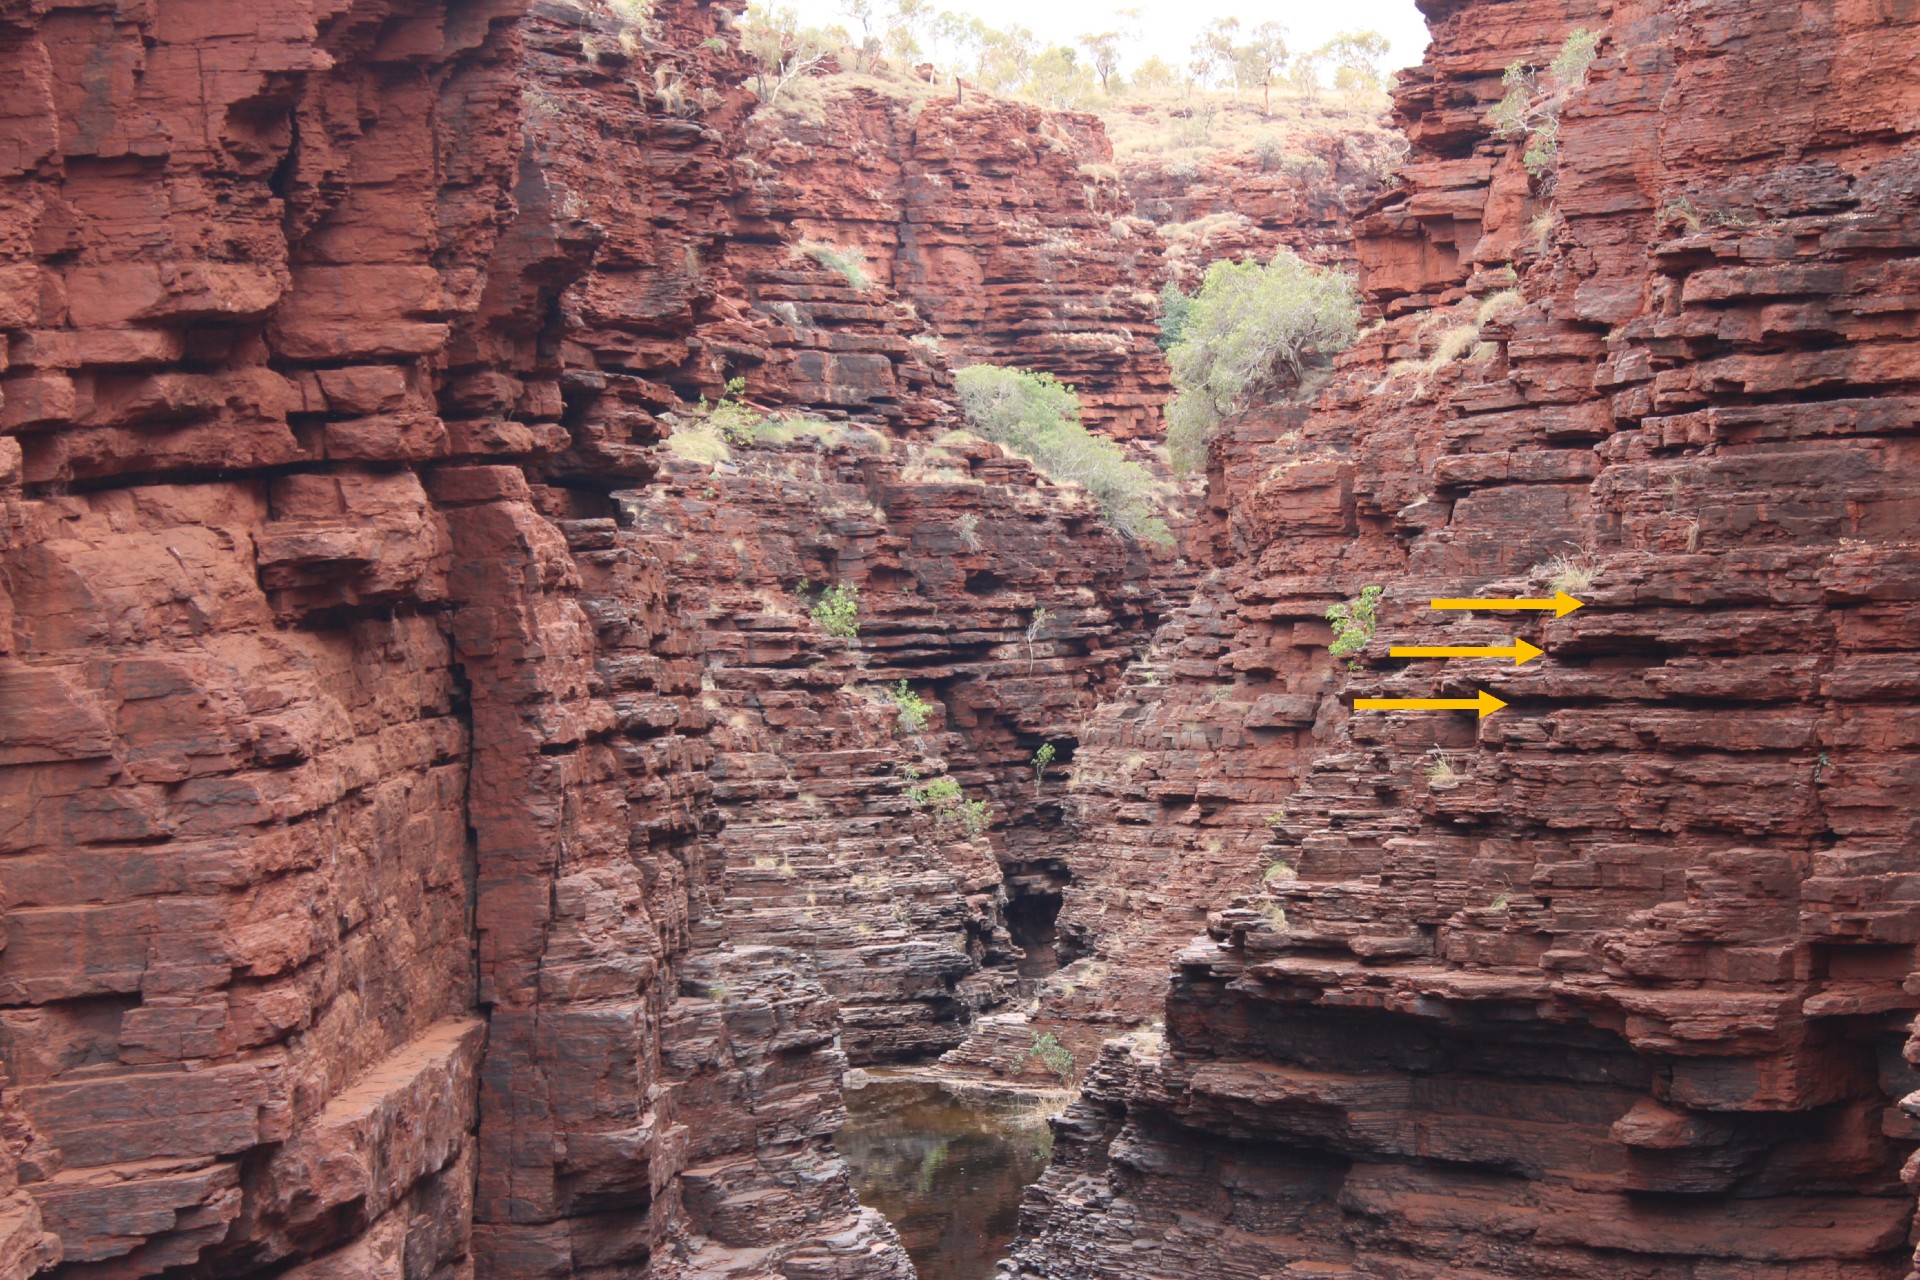 The Coffre Gorge in Karijini National Park in Western Australia shows regular alternations between reddish-brown, harder rock and softer, clay-rich rock (shown by arrows) with an average thickness of 85 cm.  These shifts are associated with past climate changes caused by changes in the eccentricity of the Earth's orbit.